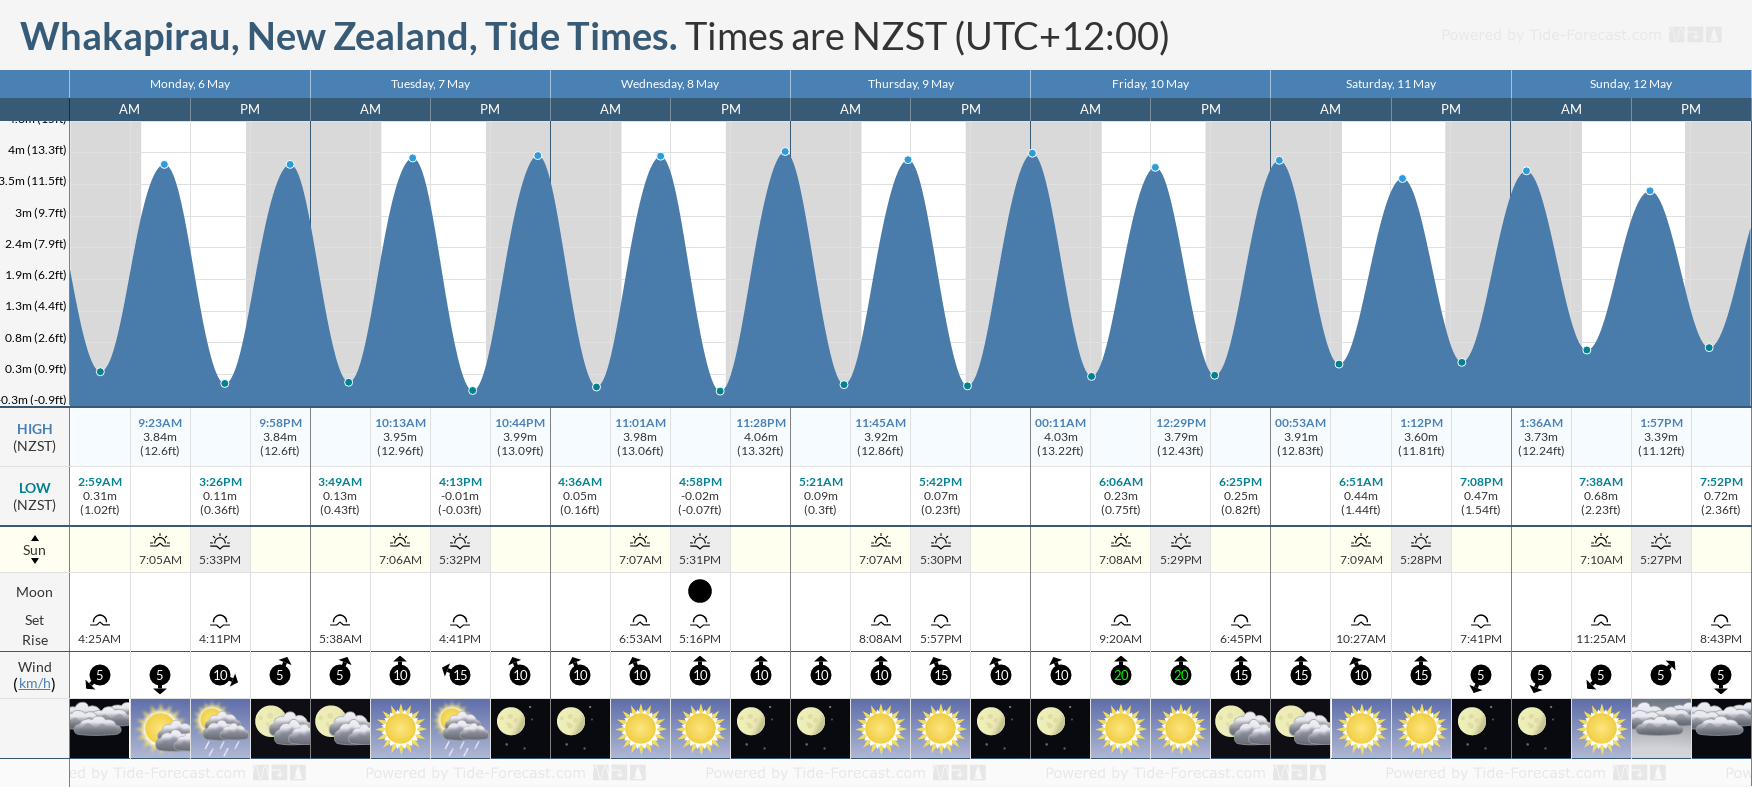 Whakapirau, New Zealand Tide Chart including high and low tide tide times for the next 7 days